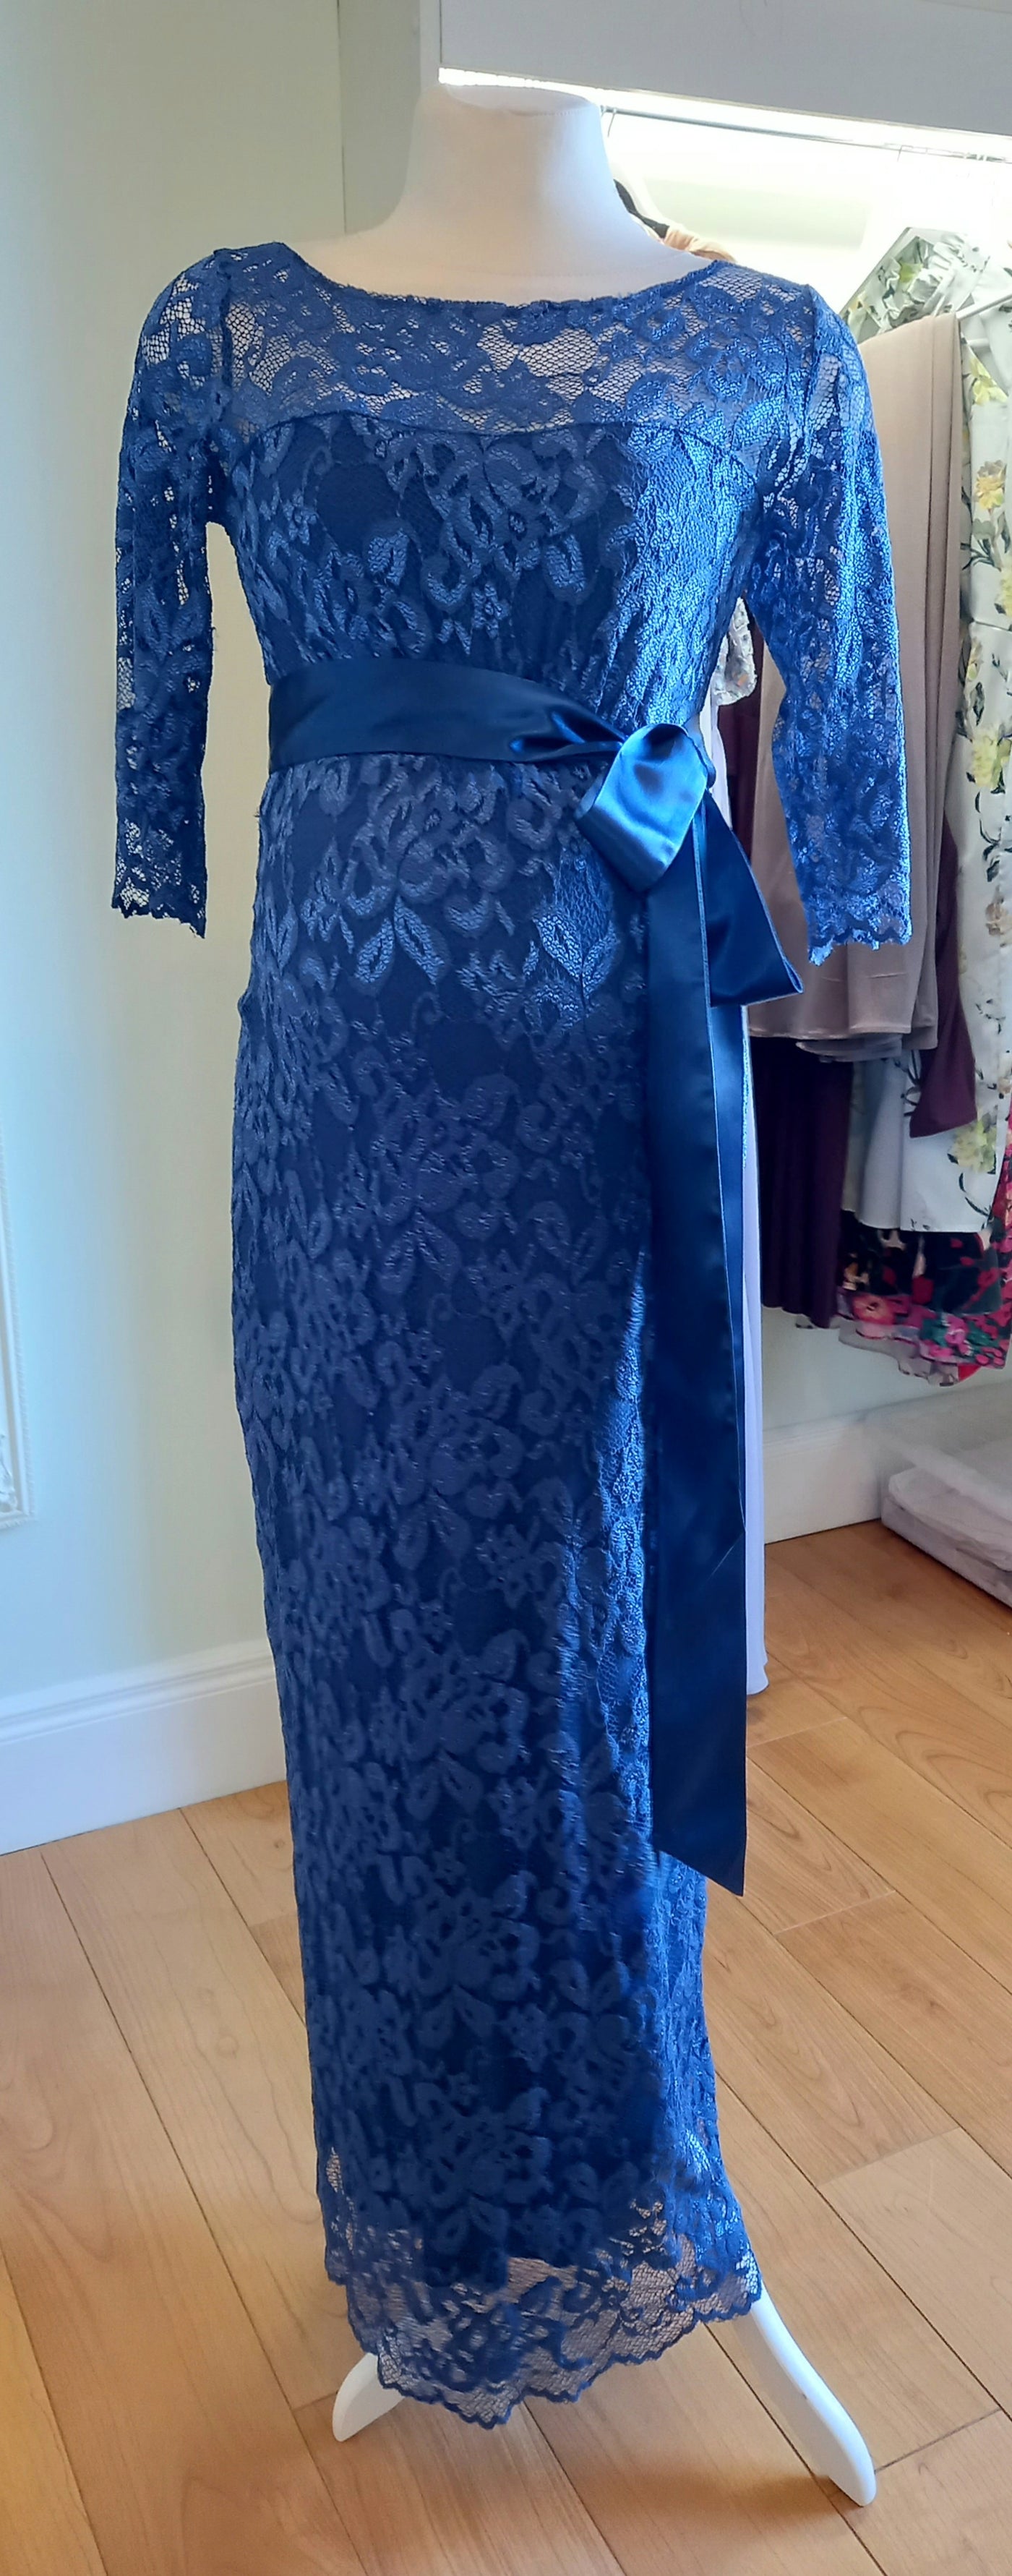 Tiffany Rose Katie Gown in Windsor Blue - Size 2 (UK 10)